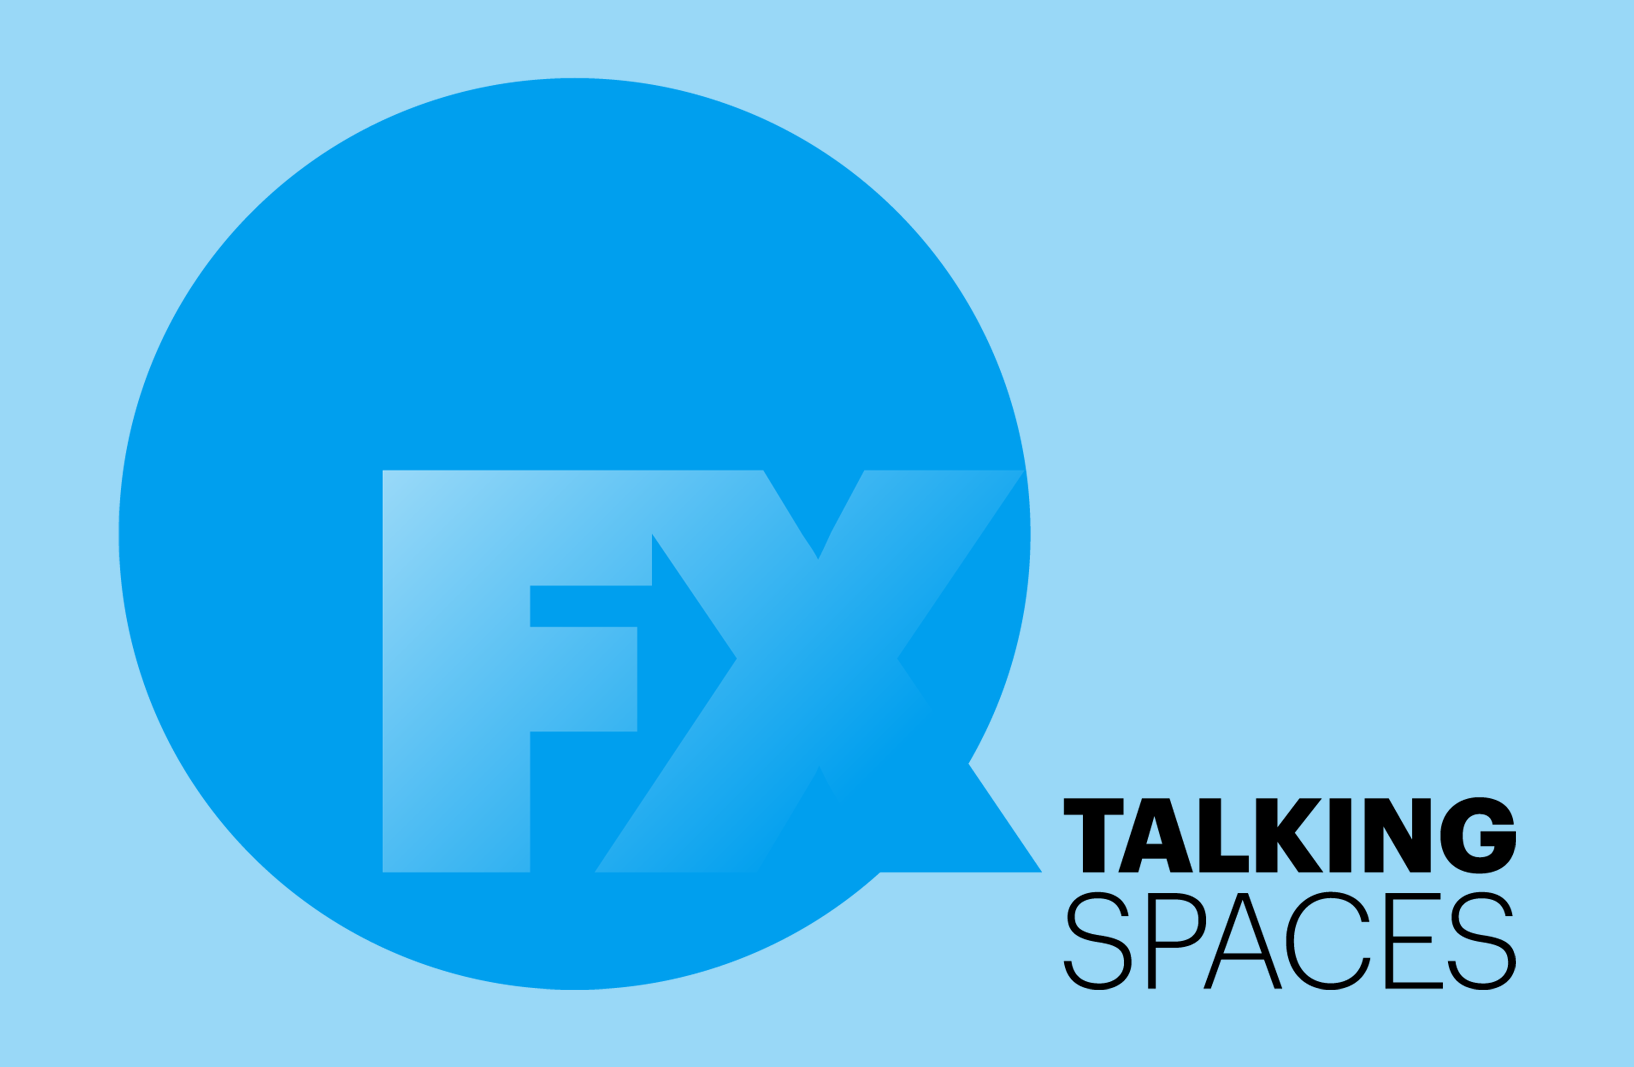 A New Episode of Talking Spaces, a podcast from FX Magazine